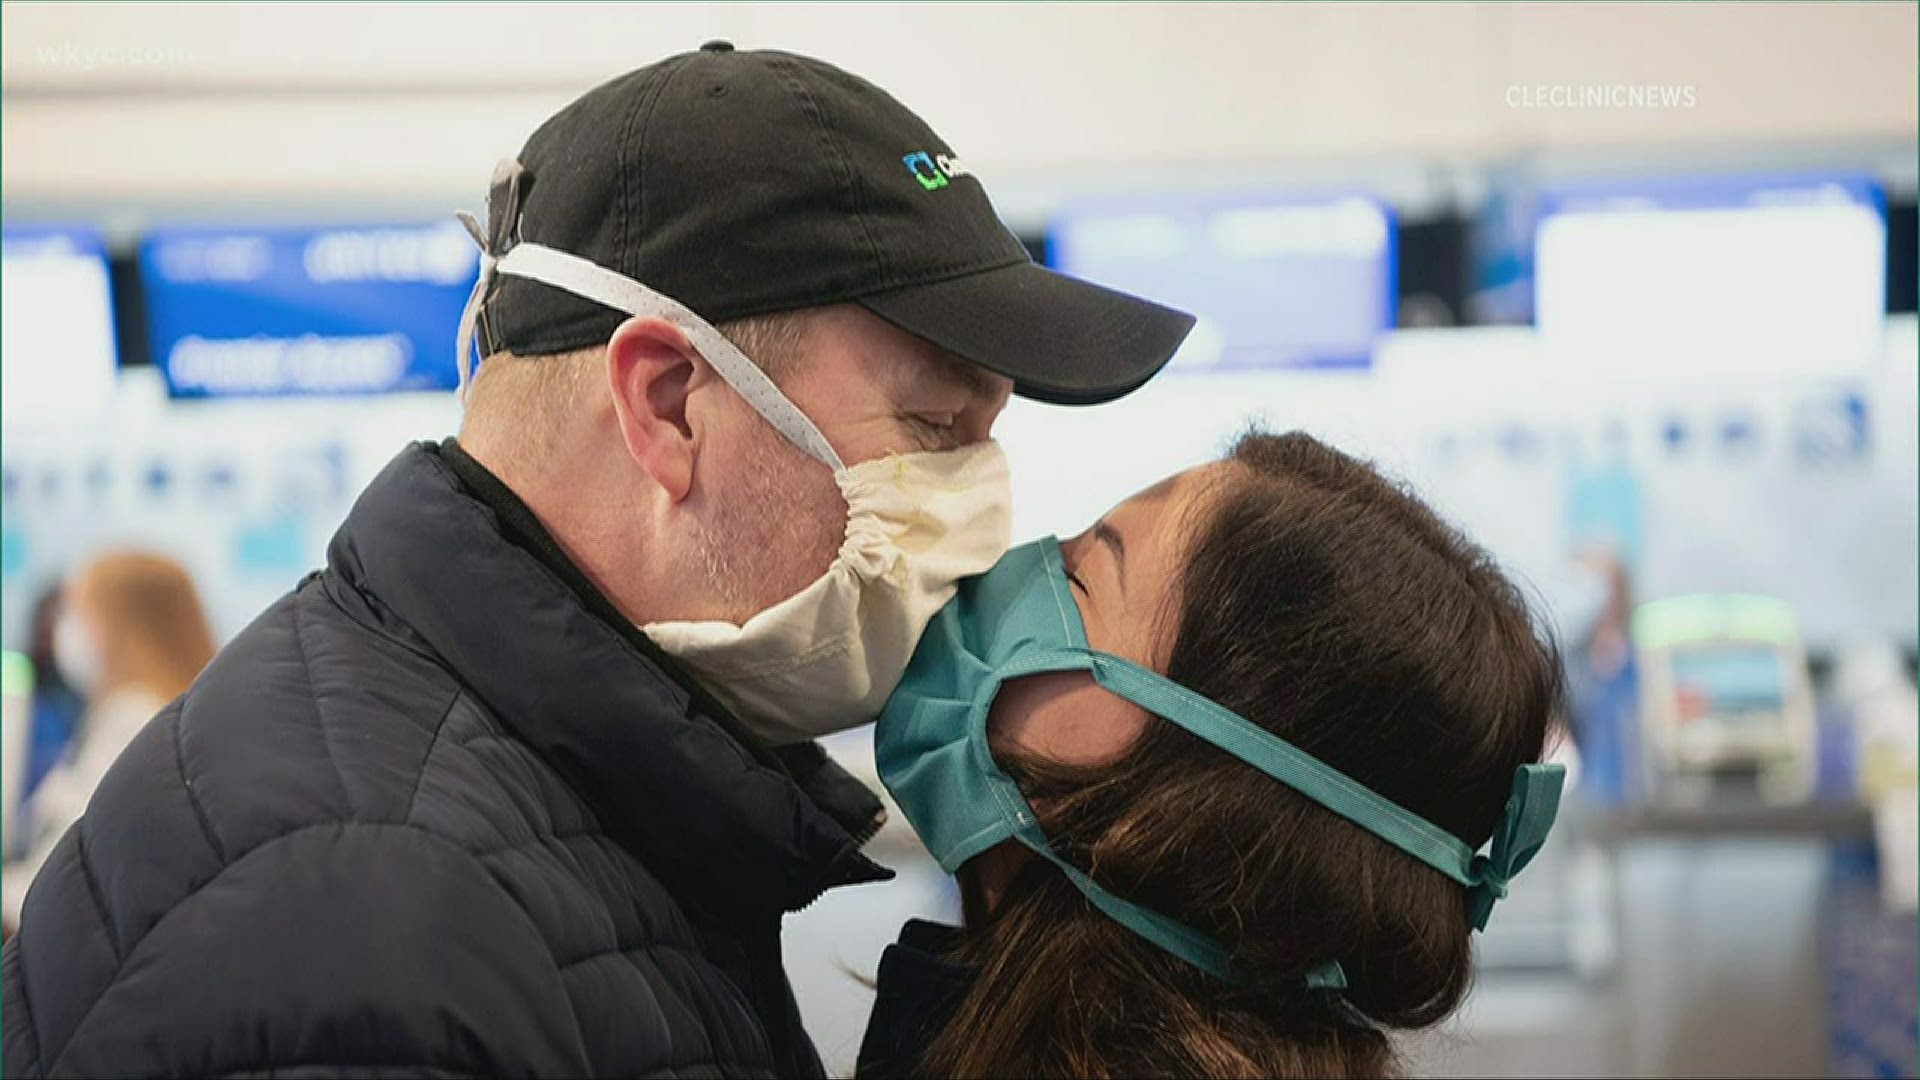 More than two dozen healthcare workers boarded a plane this morning to head to New York. They volunteered to help in some of the hardest-hit areas in the country.